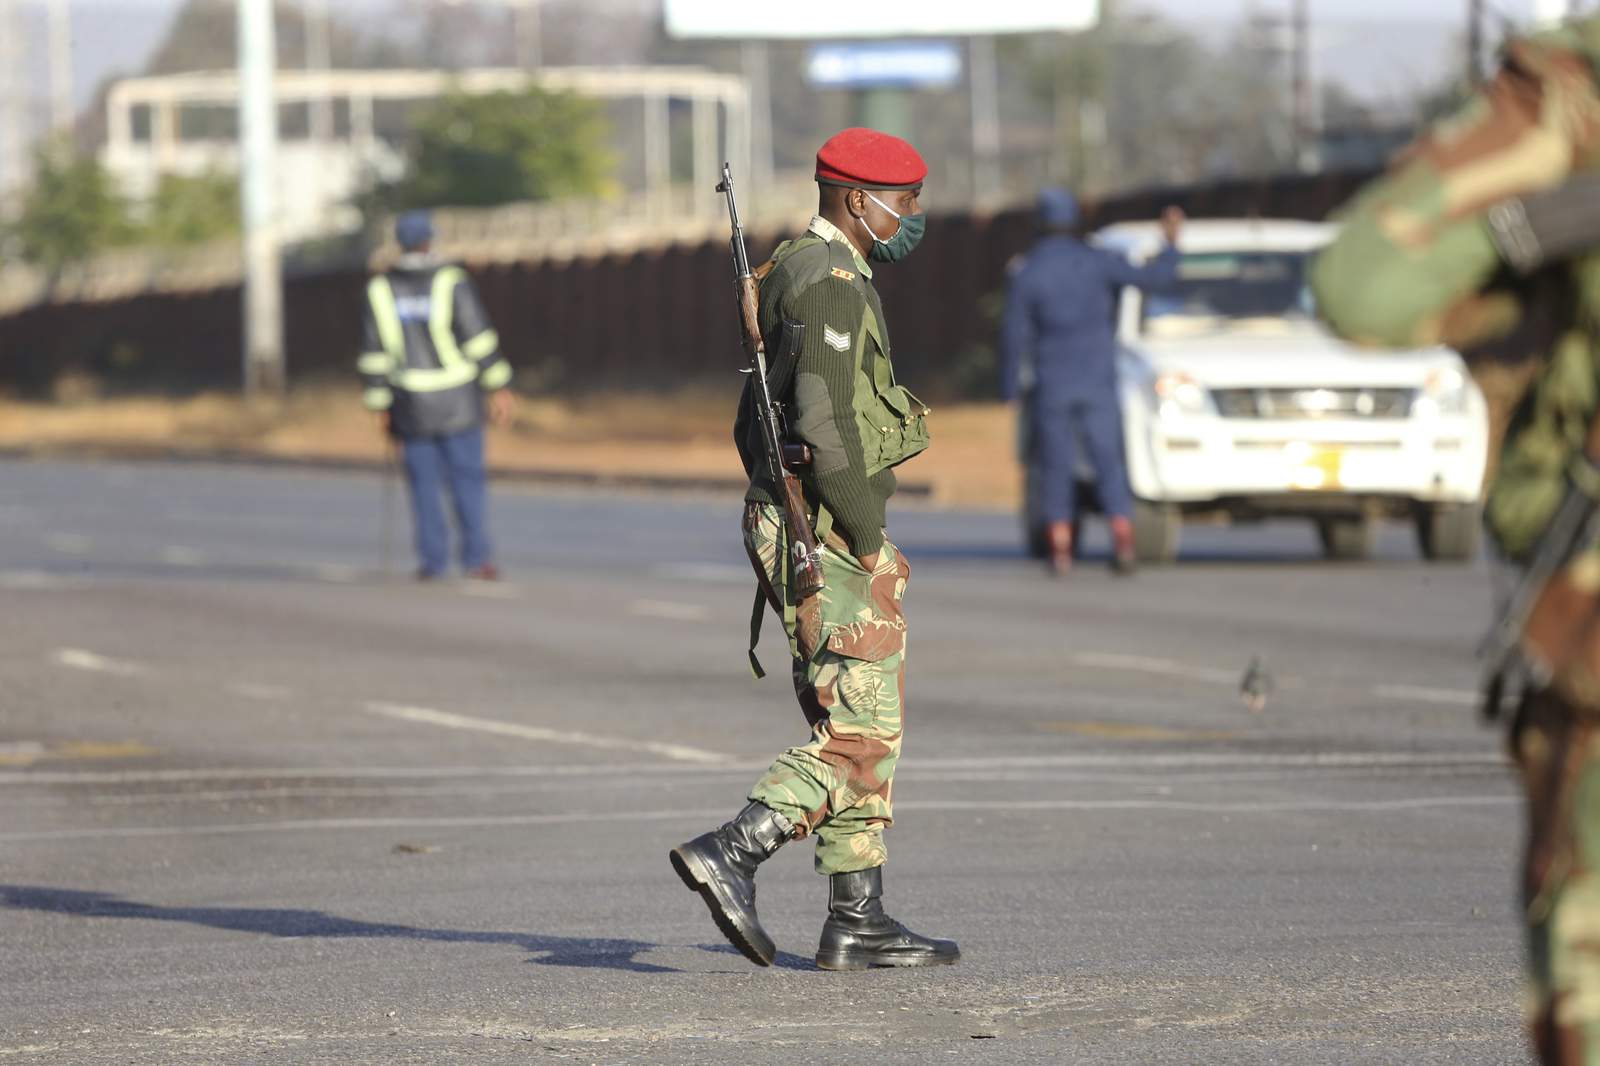 Scores of Zimbabwe protesters arrested, military in streets